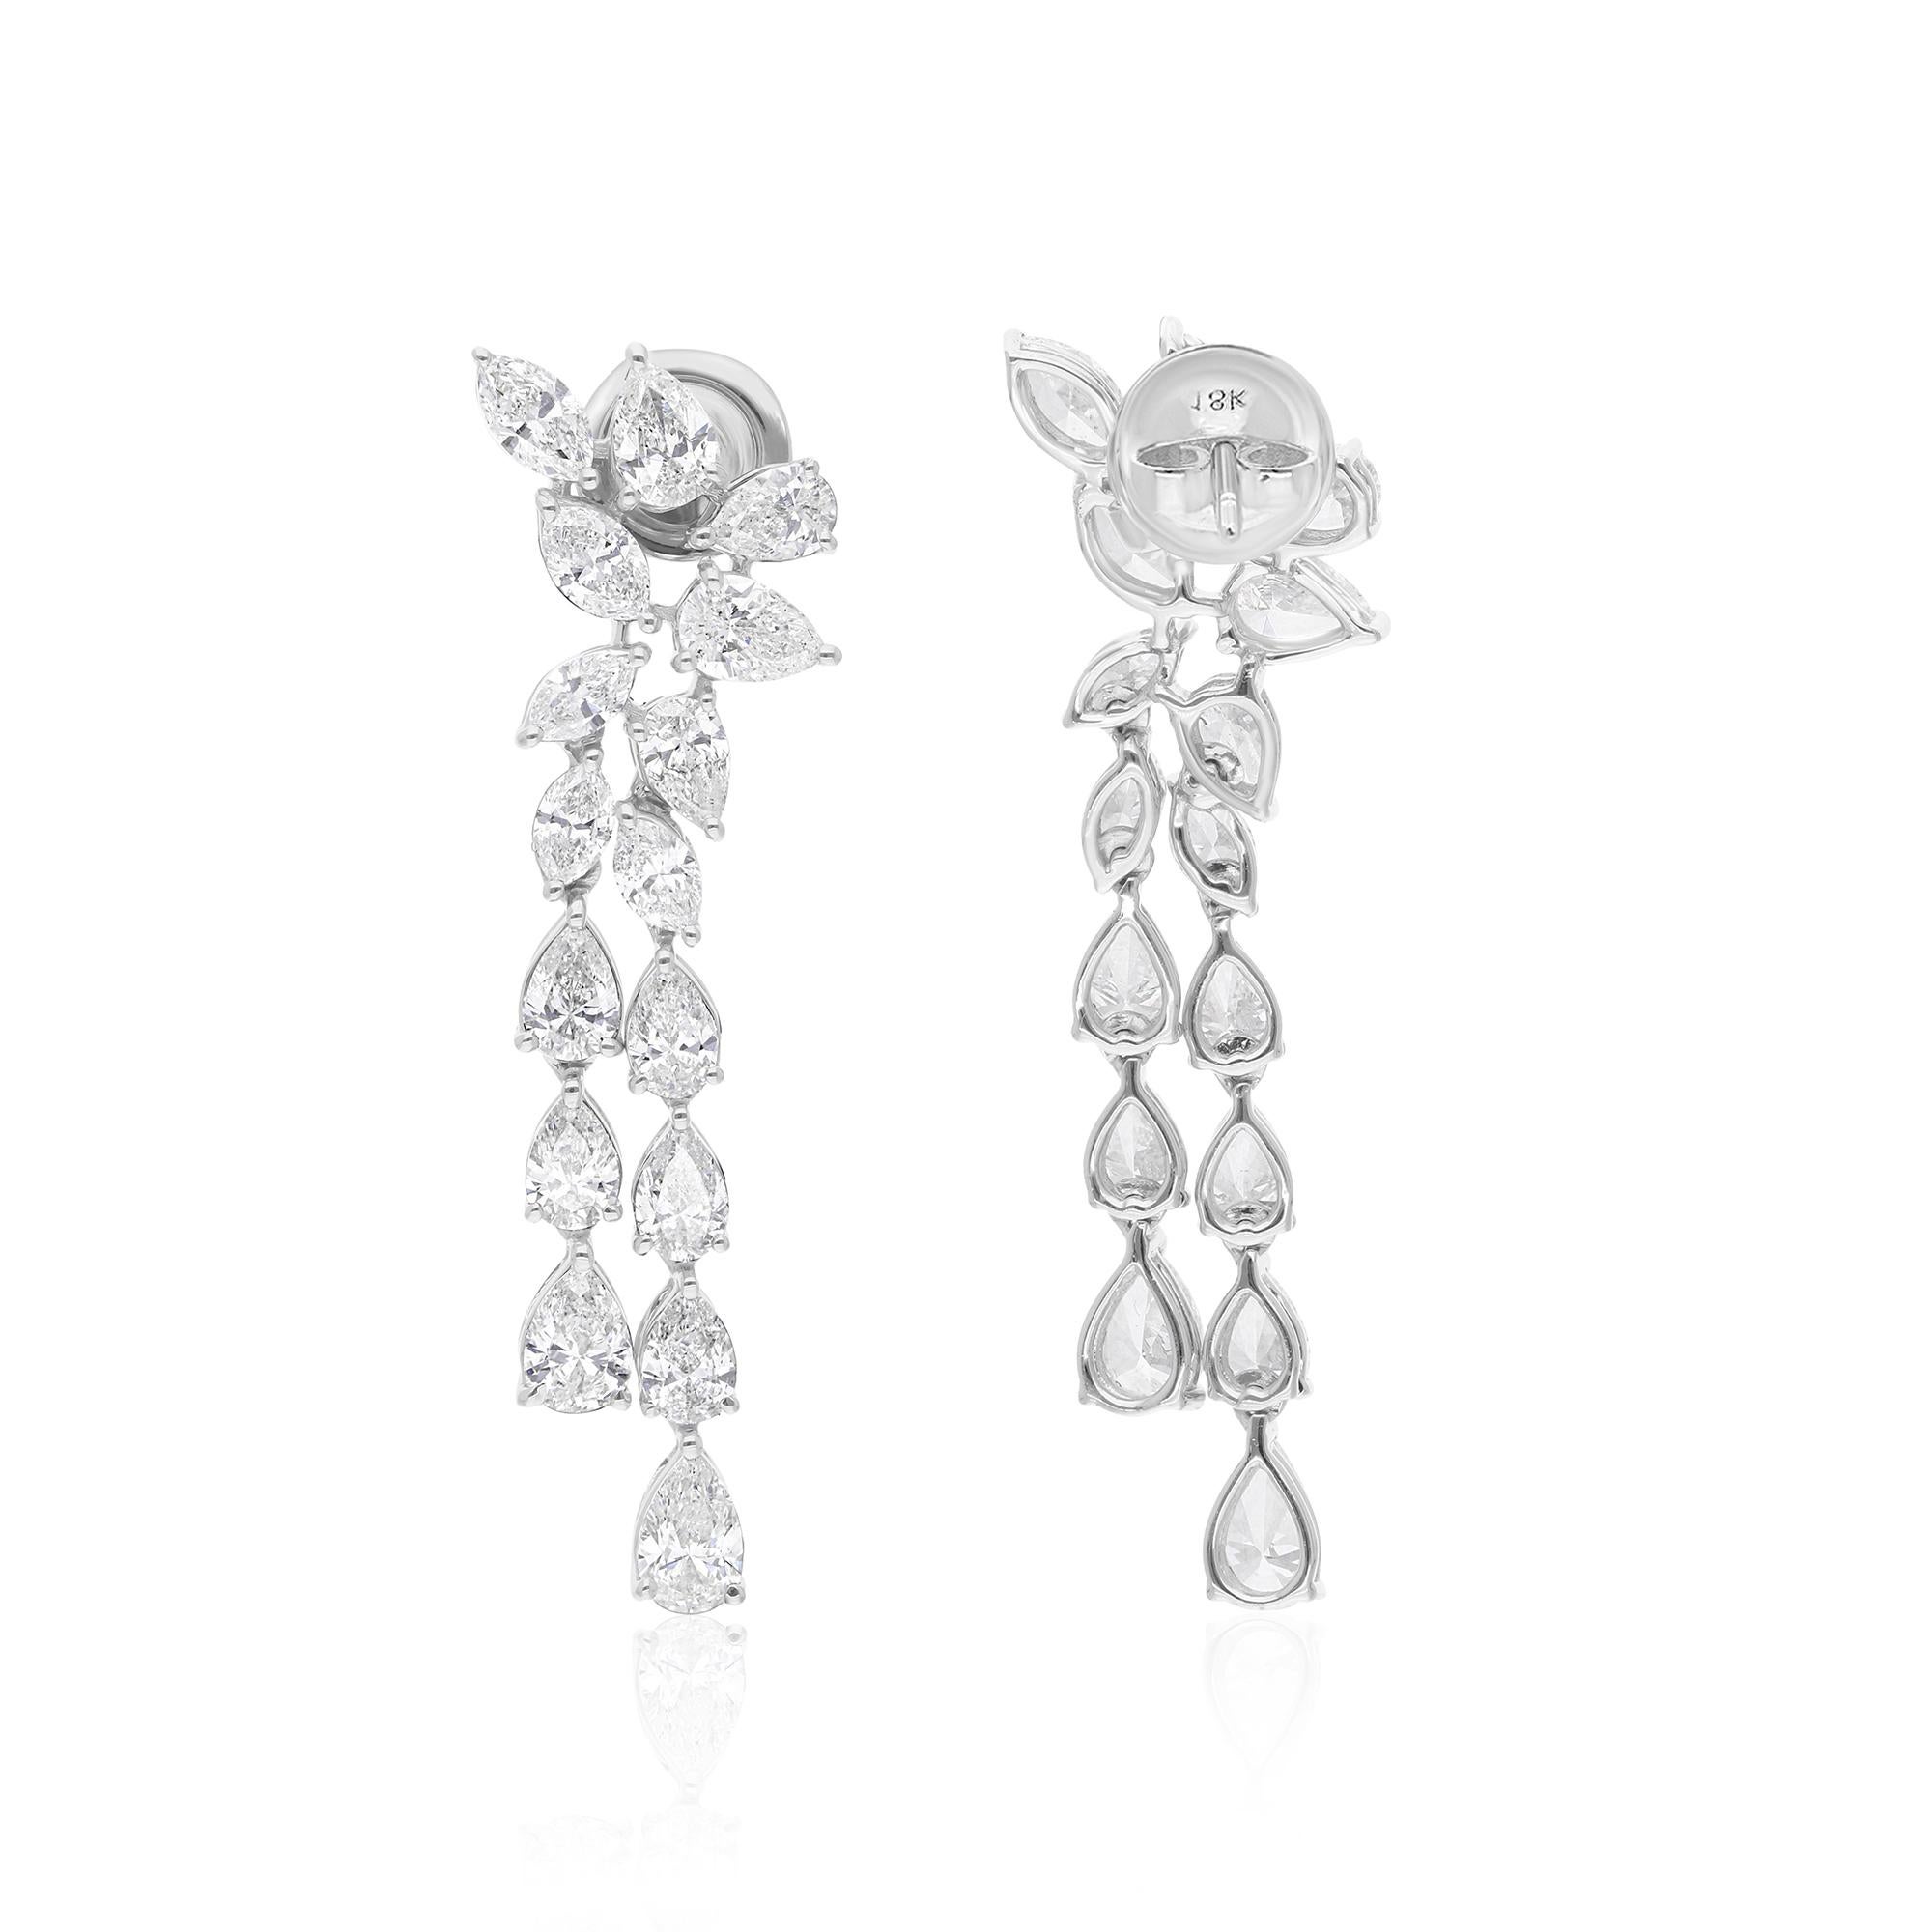 Modern Natural 5.18 Carat Pear & Marquise Diamond Earrings 18 Karat White Gold Jewelry For Sale